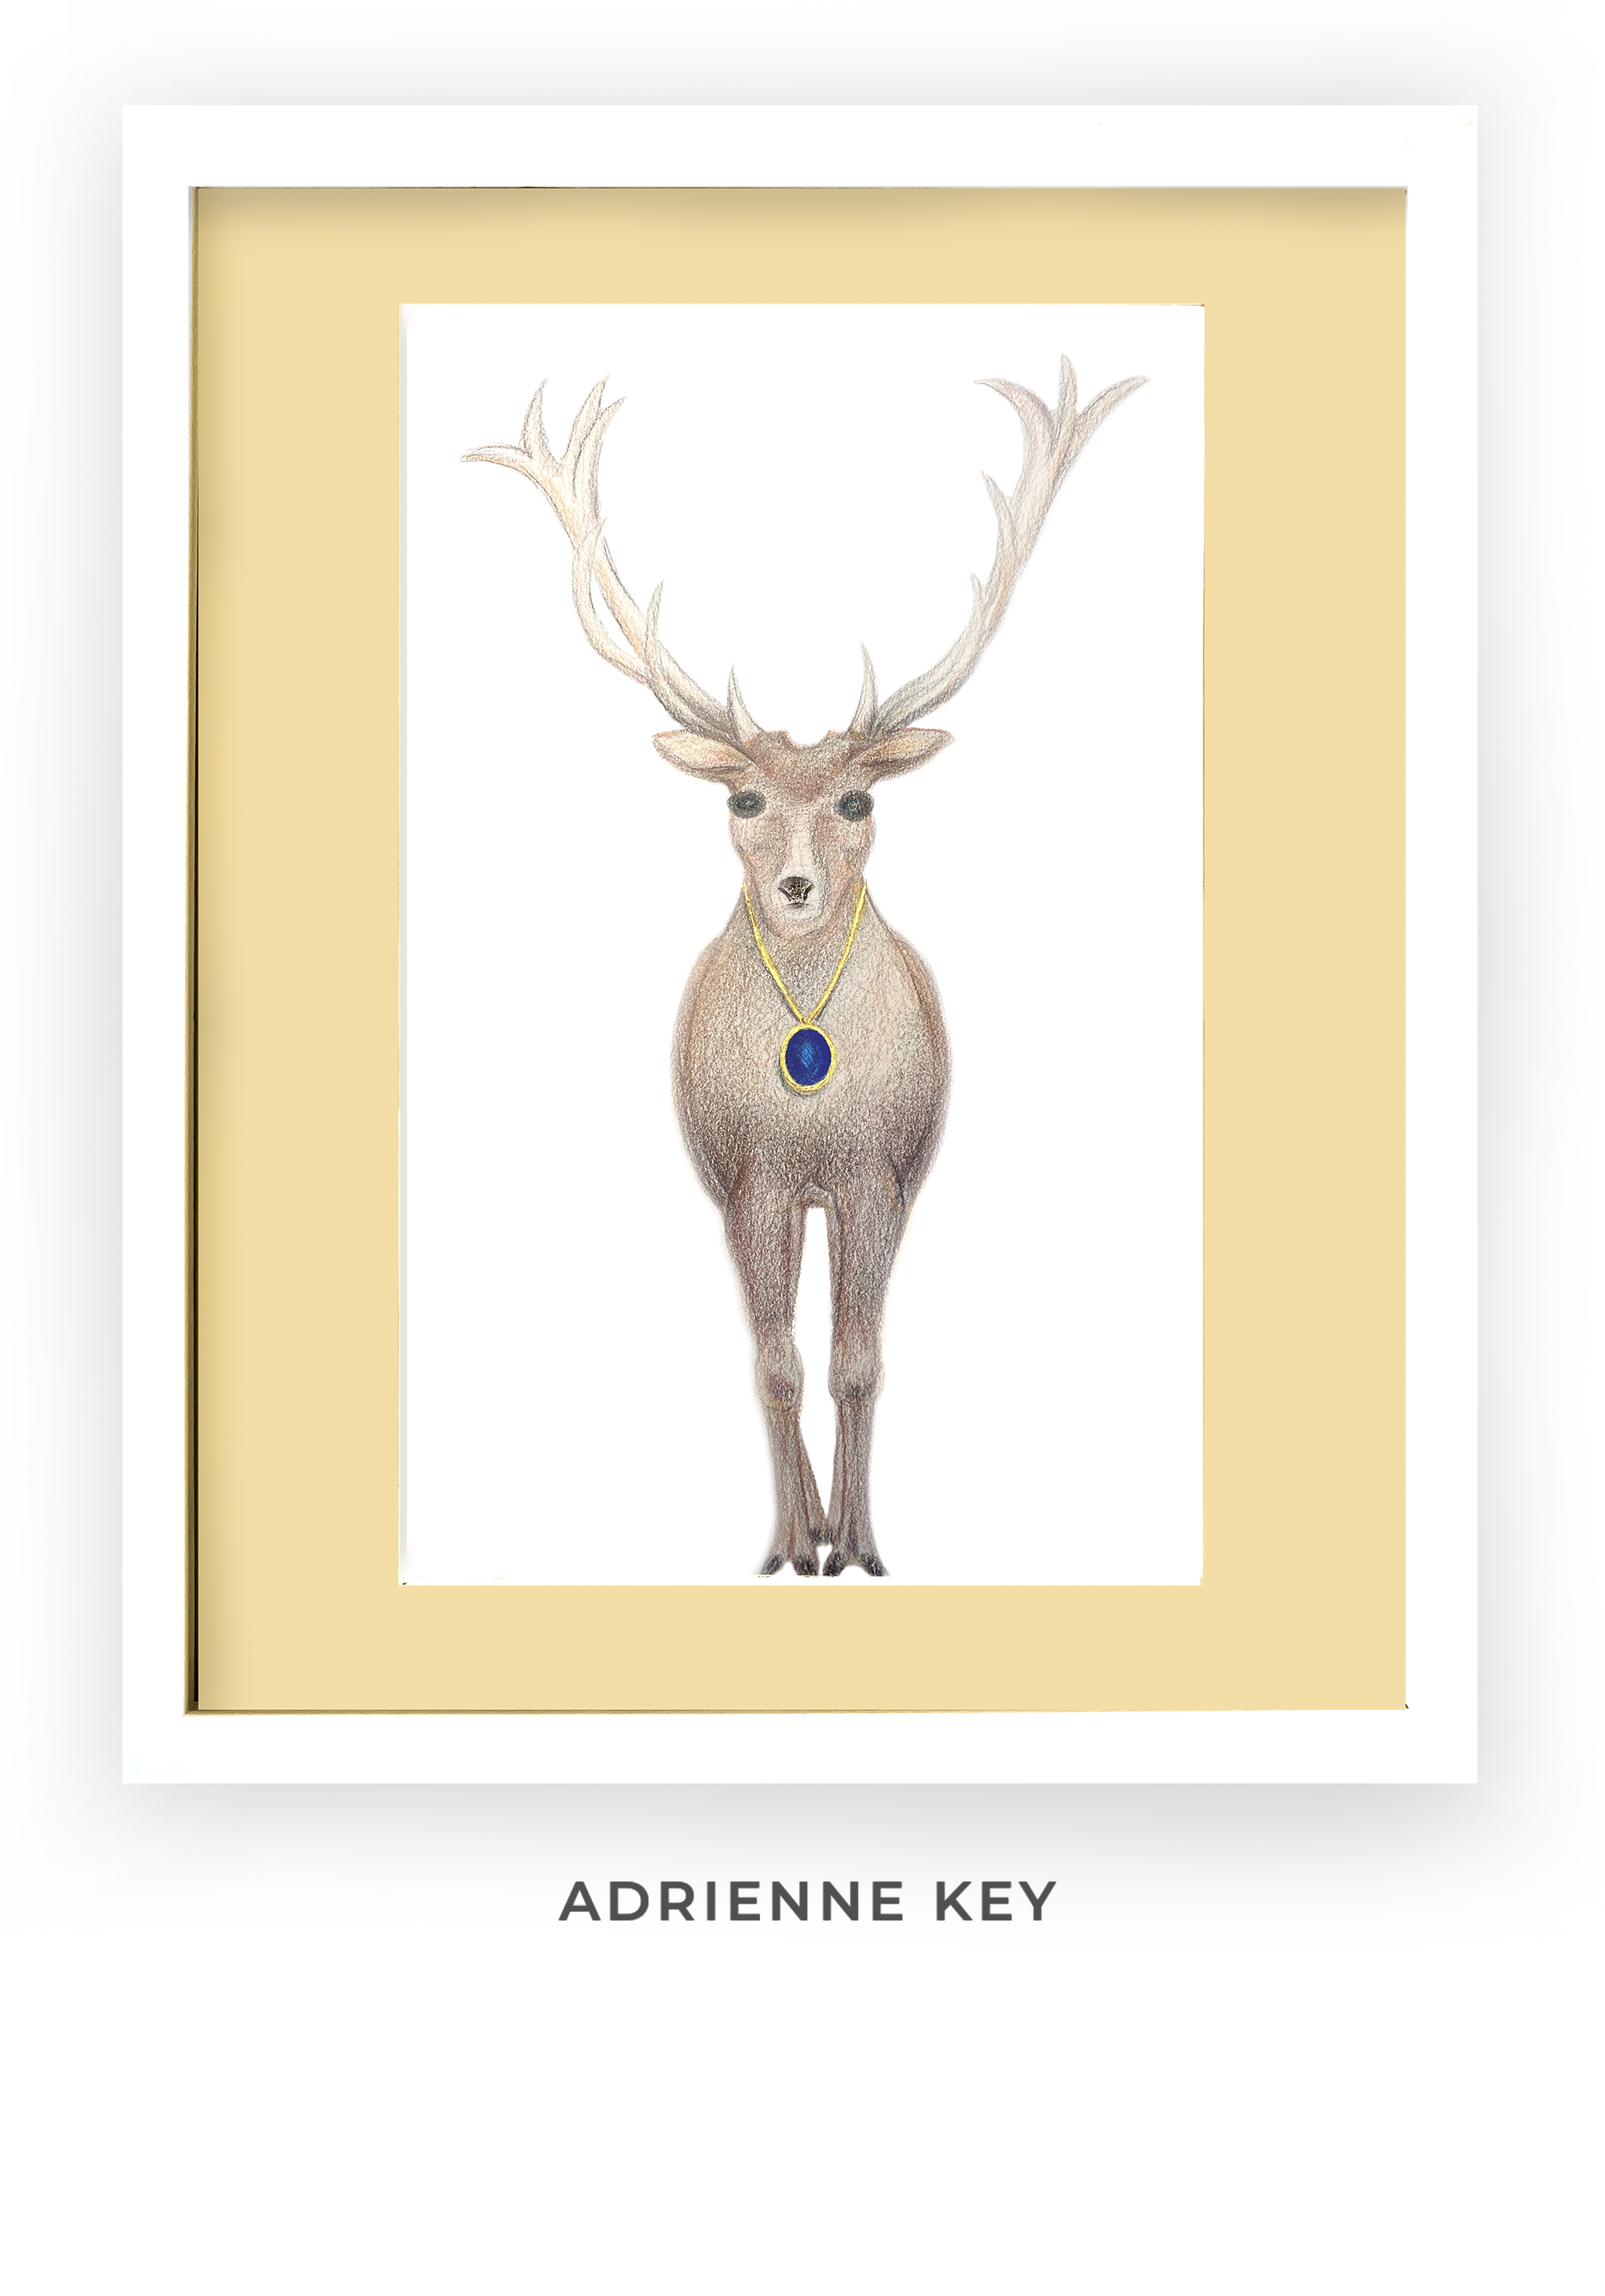 Framed original art in ink, watercolor, and color pencil of a deer facing forward wearing a sapphire and gold amulet necklace